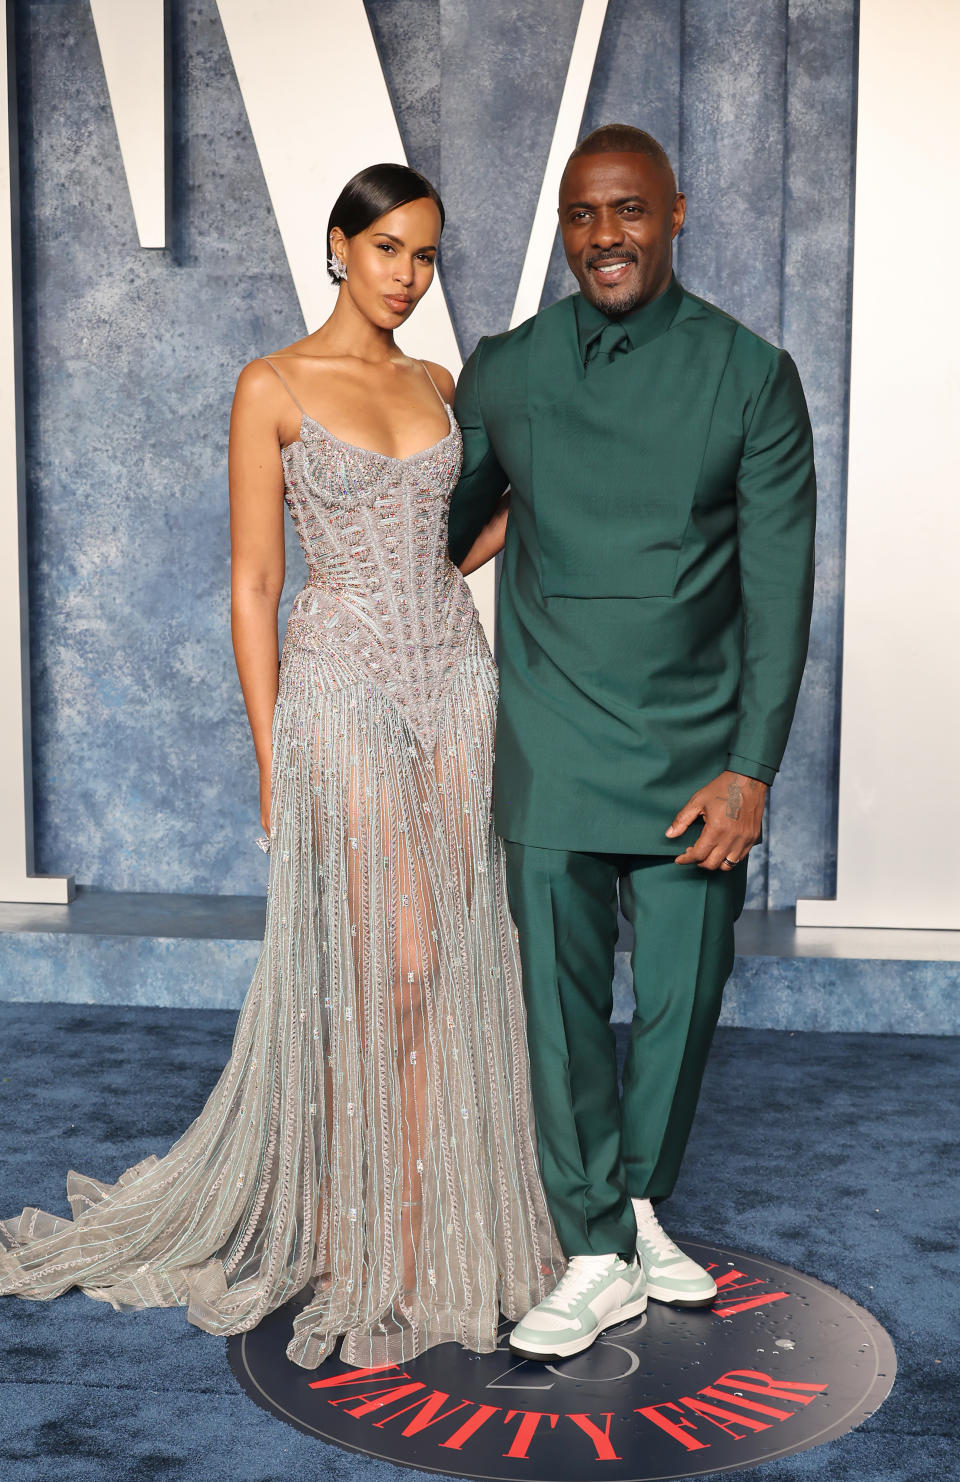 BEVERLY HILLS, CALIFORNIA - MARCH 12: Idris Elba (R) and Sabrina Dhowre Elba attend the 2023 Vanity Fair Oscar Party Hosted By Radhika Jones at Wallis Annenberg Center for the Performing Arts on March 12, 2023 in Beverly Hills, California. (Photo by Amy Sussman/Getty Images)